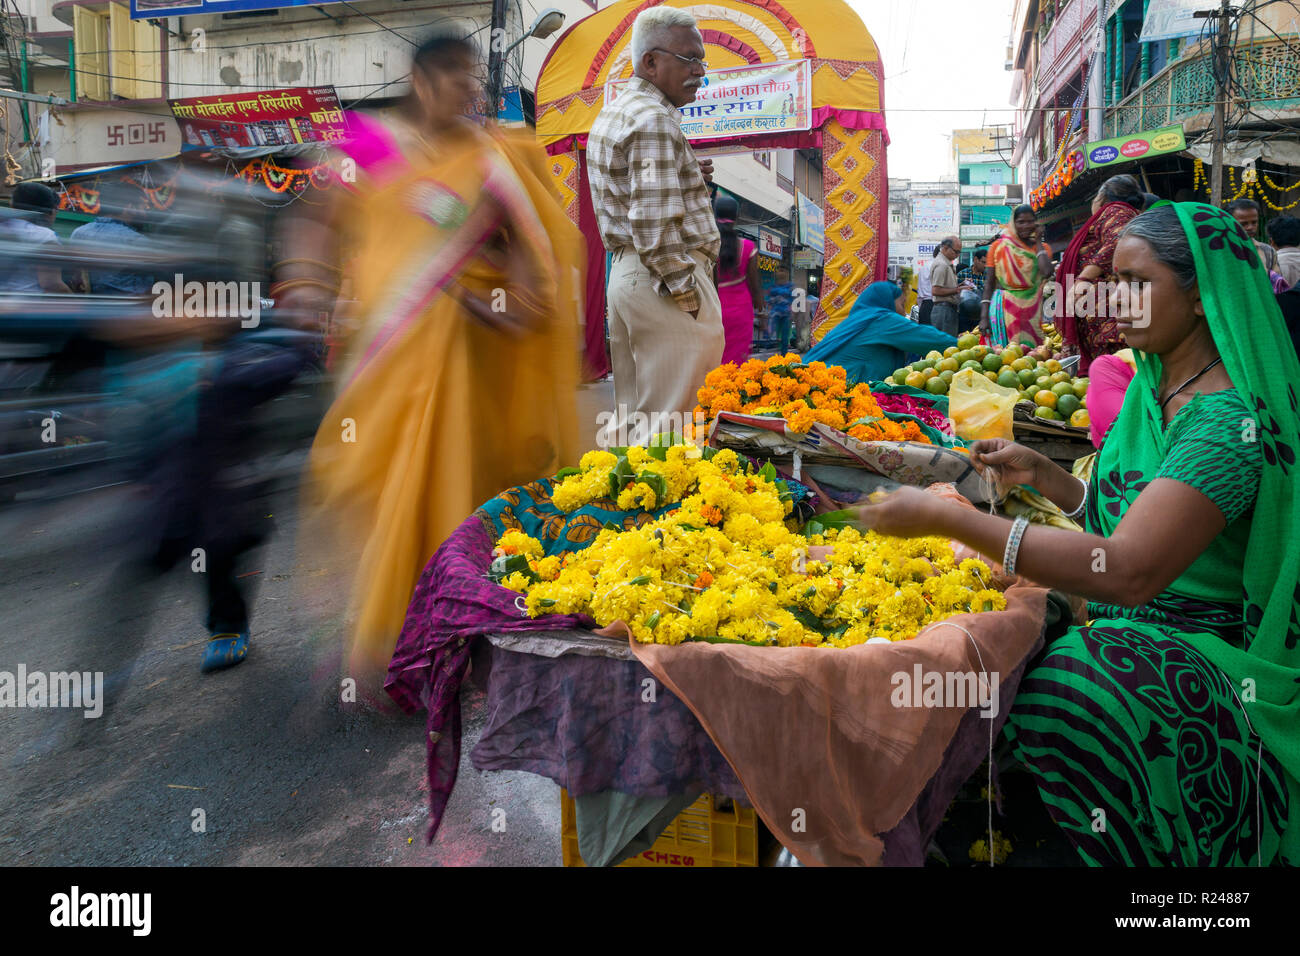 Busy street scene in the Old City, Udaipur, Rajasthan, India, Asia Stock Photo